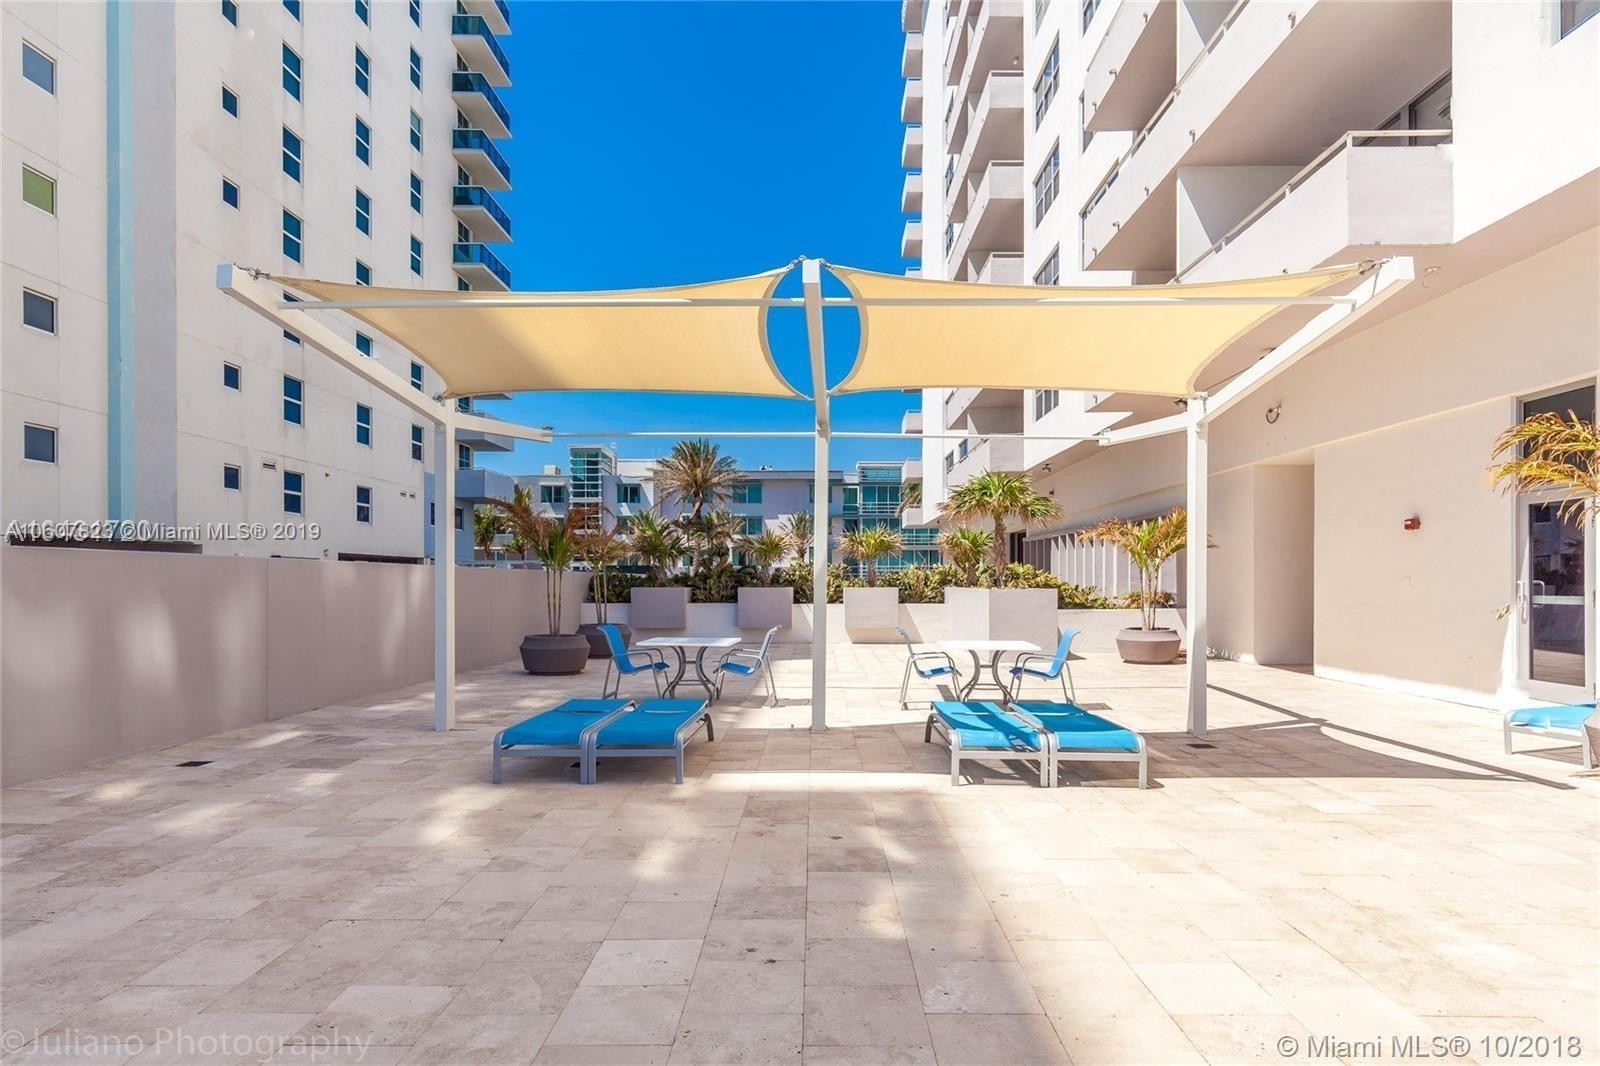 16. Condominiums at 9225 Collins Ave, 1006 Surfside